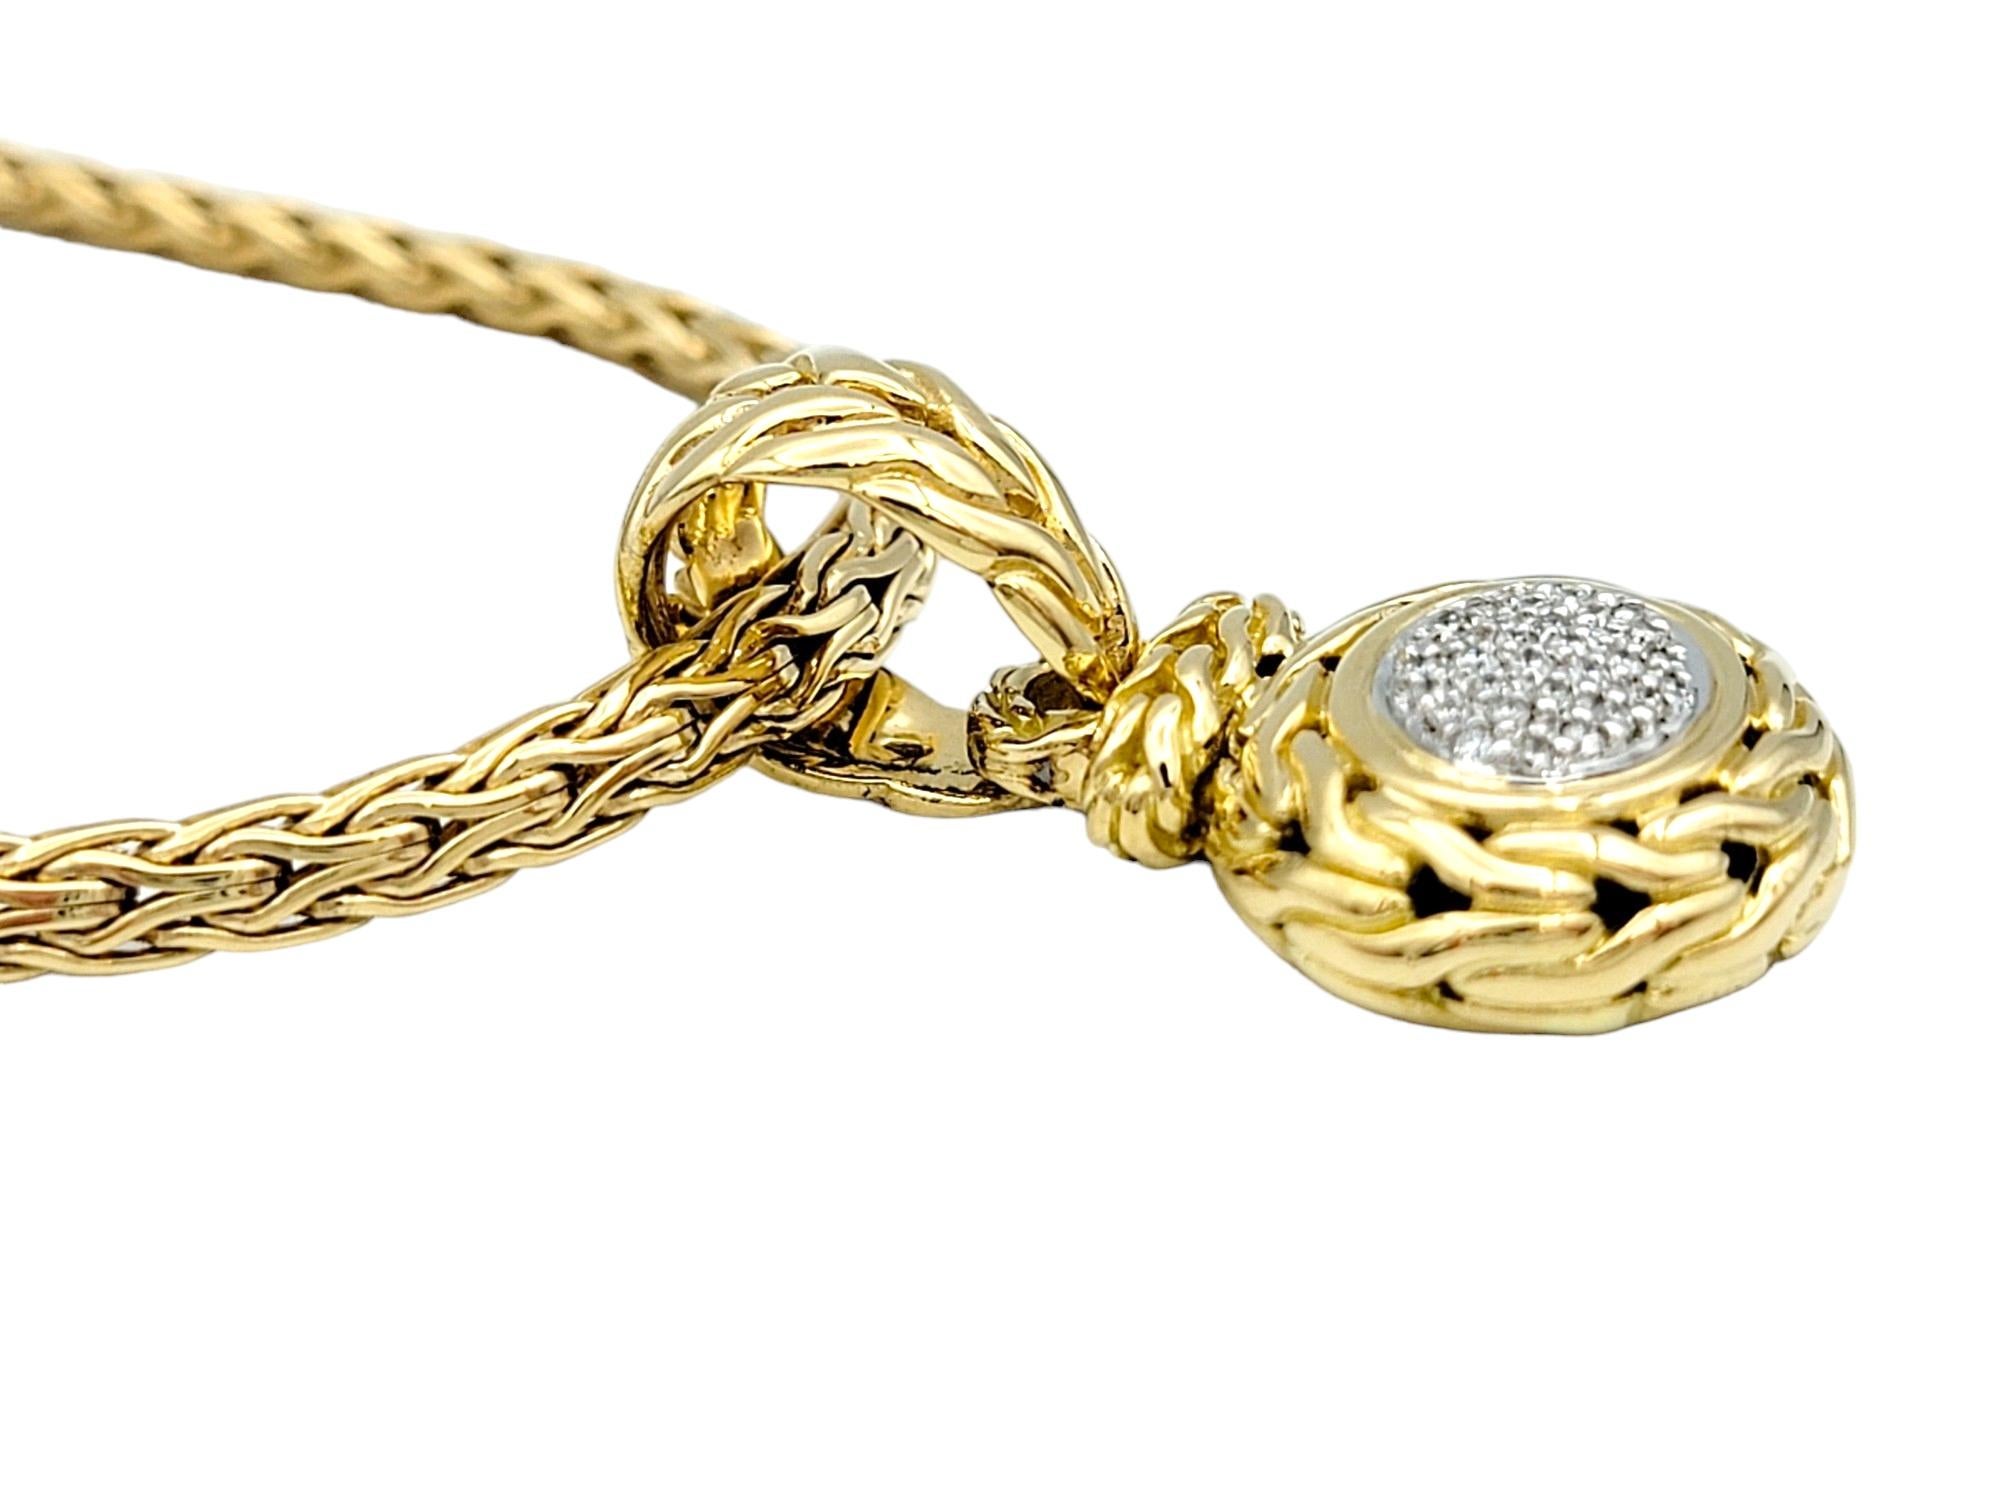 Contemporary John Hardy Pave Diamond Oval Pendant Necklace with Chain in 18 Karat Yellow Gold For Sale